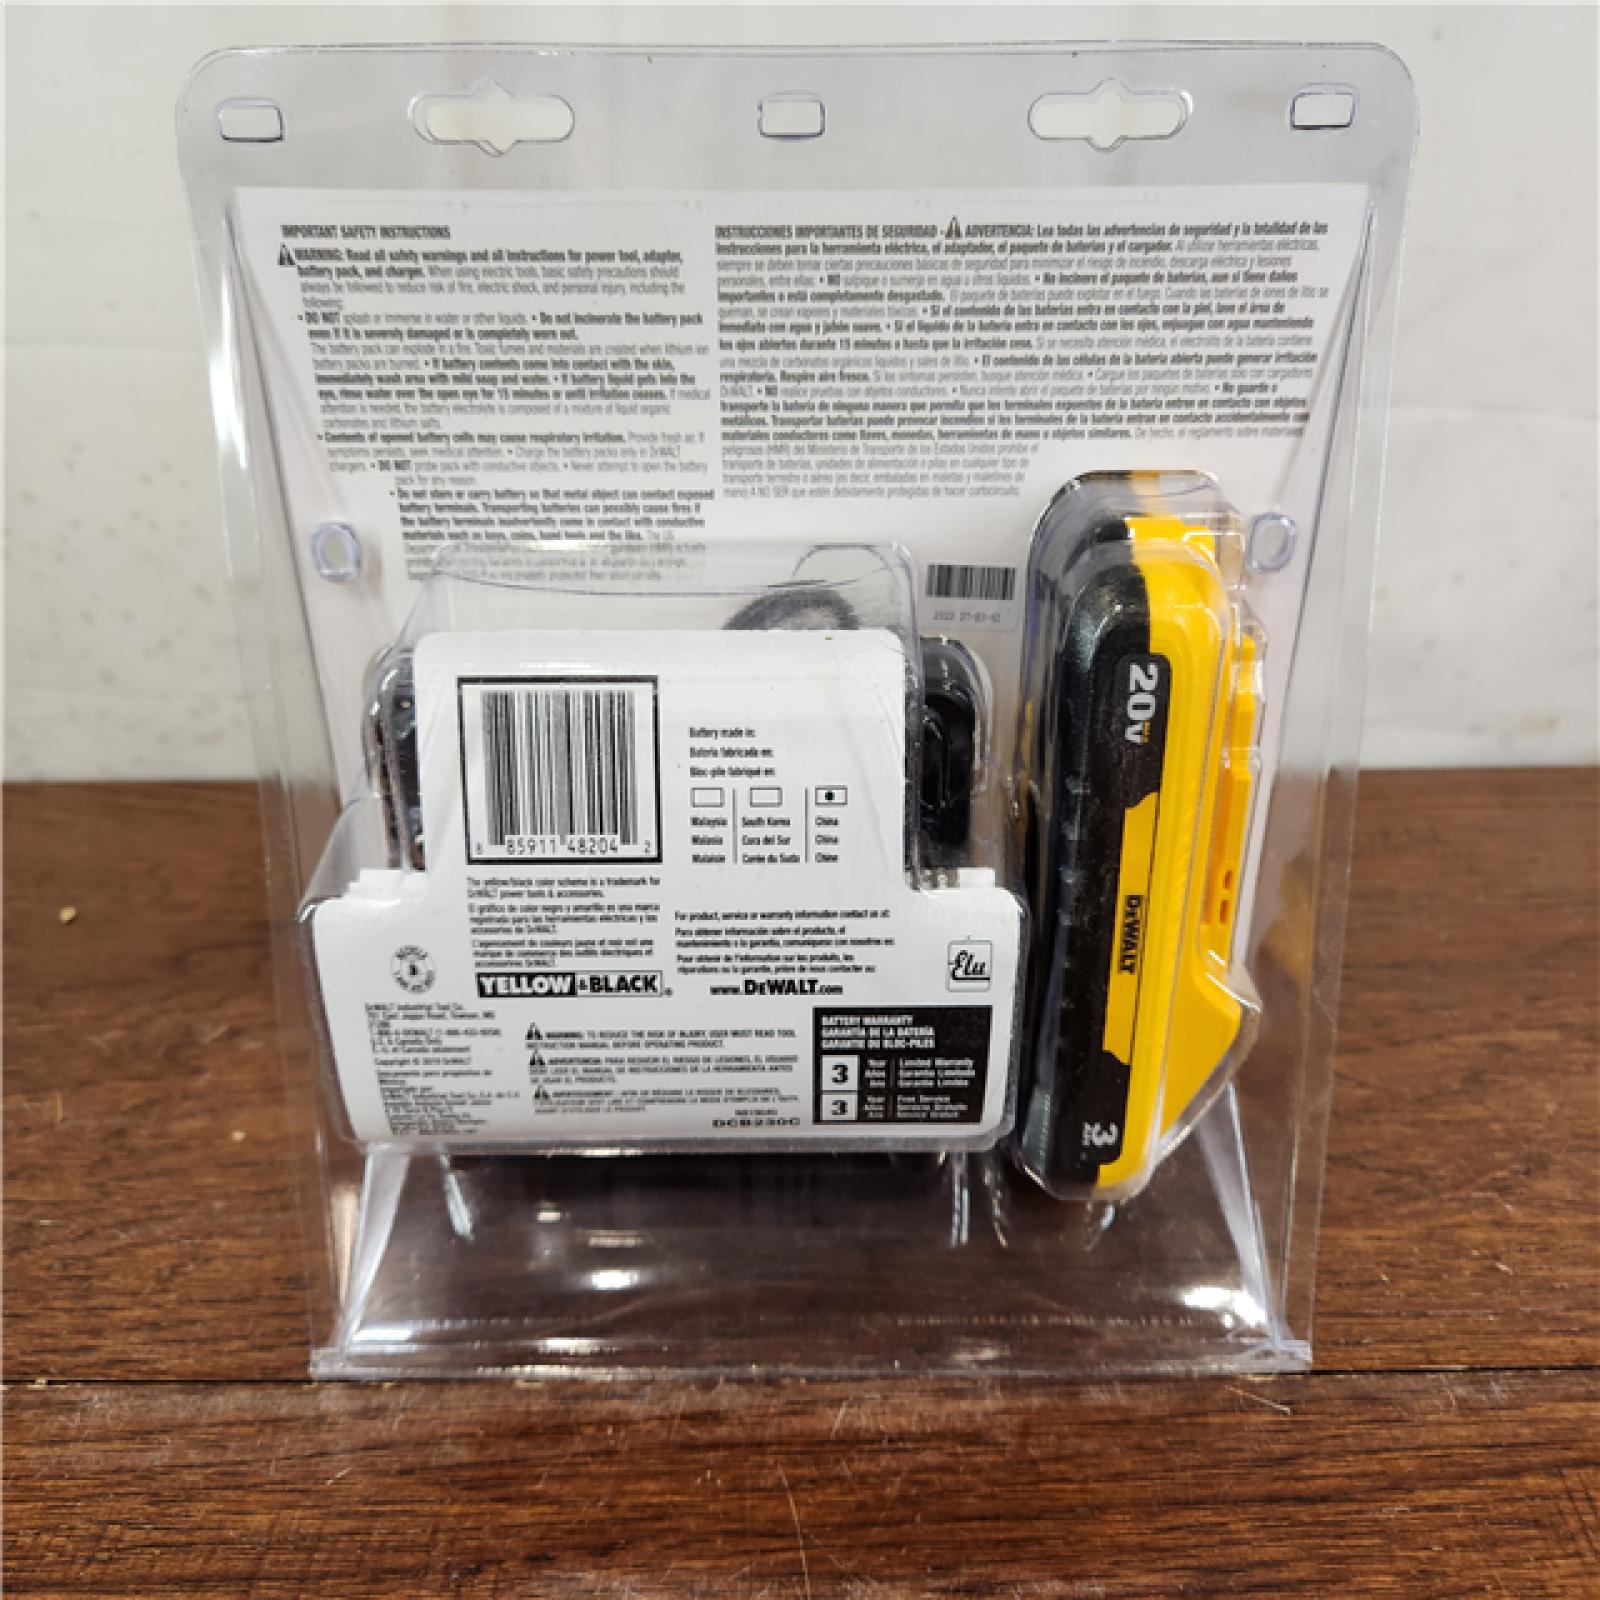 NEW! Dewalt 20-Volt MAX Lithium-Ion Battery Pack 3.0Ah with Charger